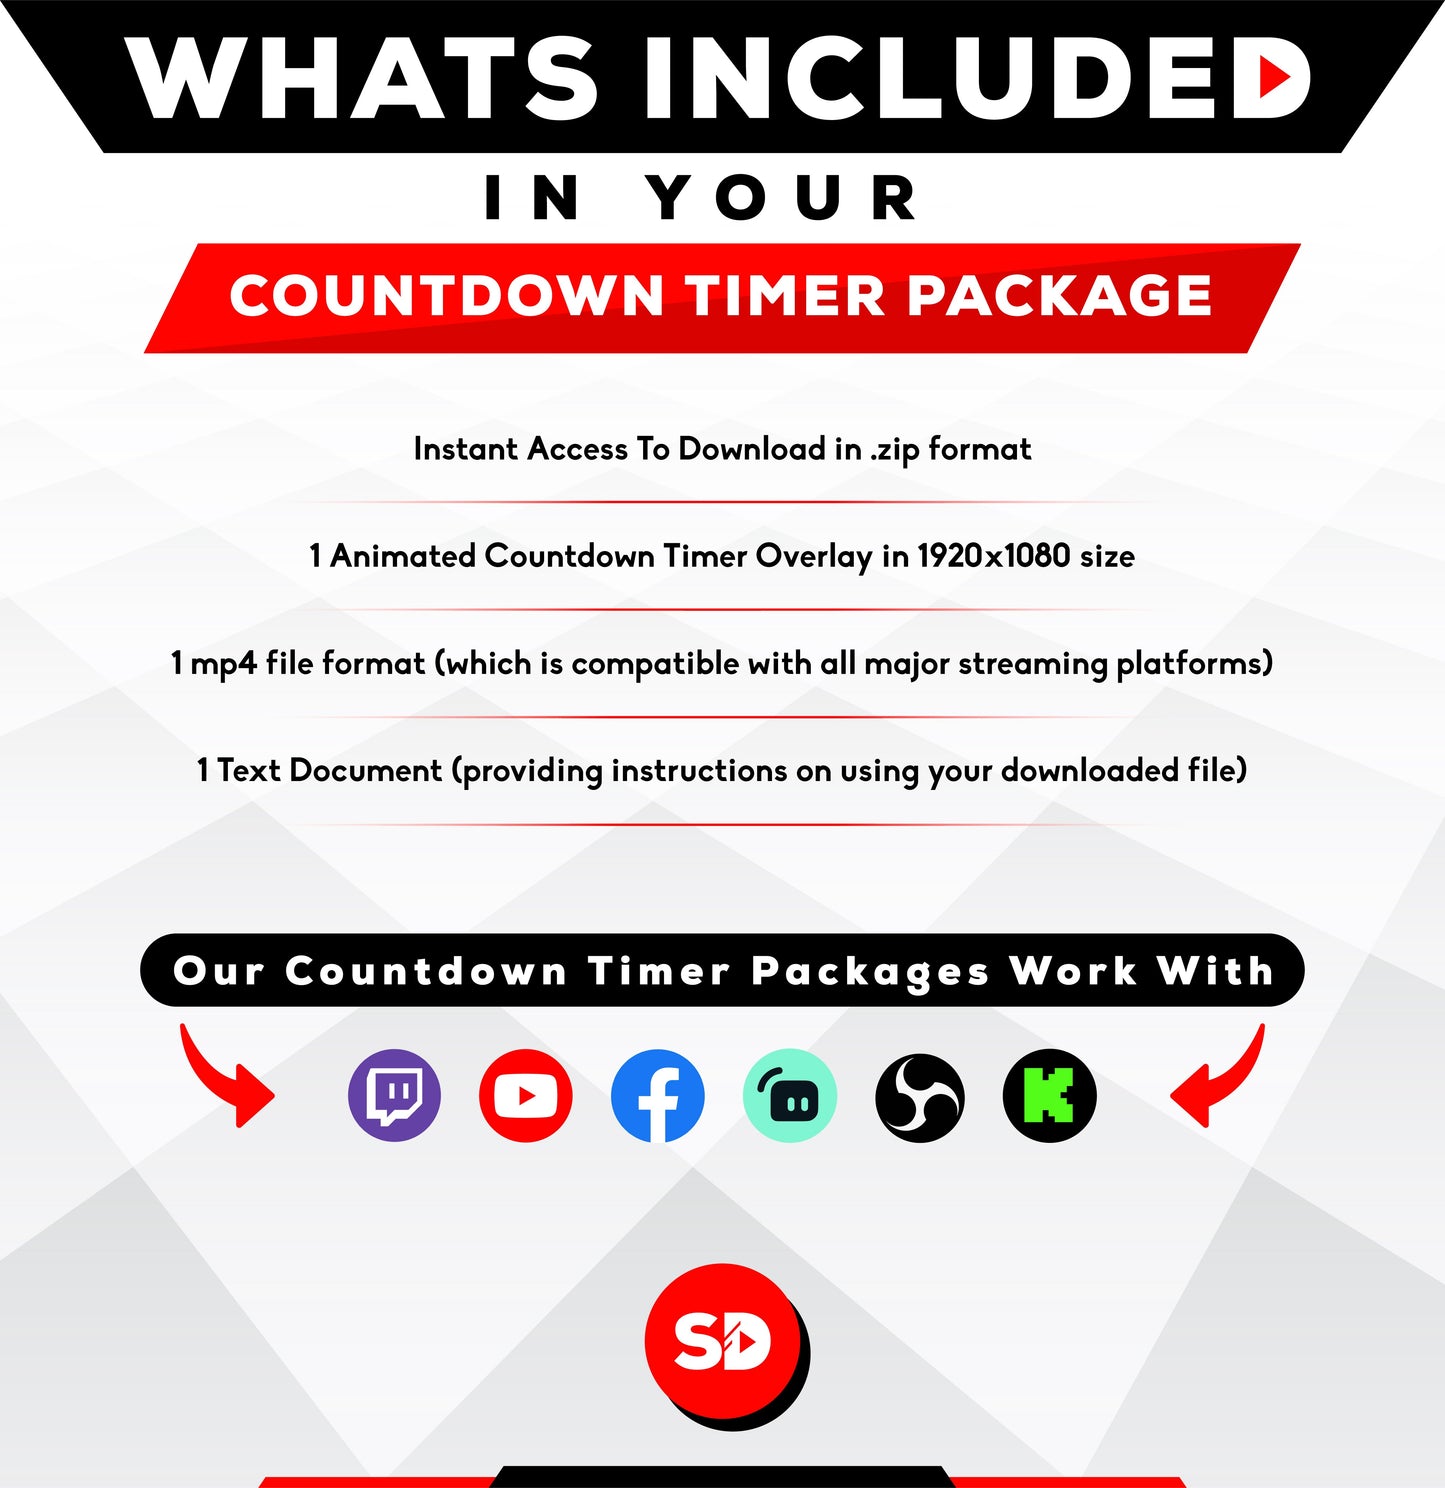 whats included in your package - countdown timer - loadout - stream designz